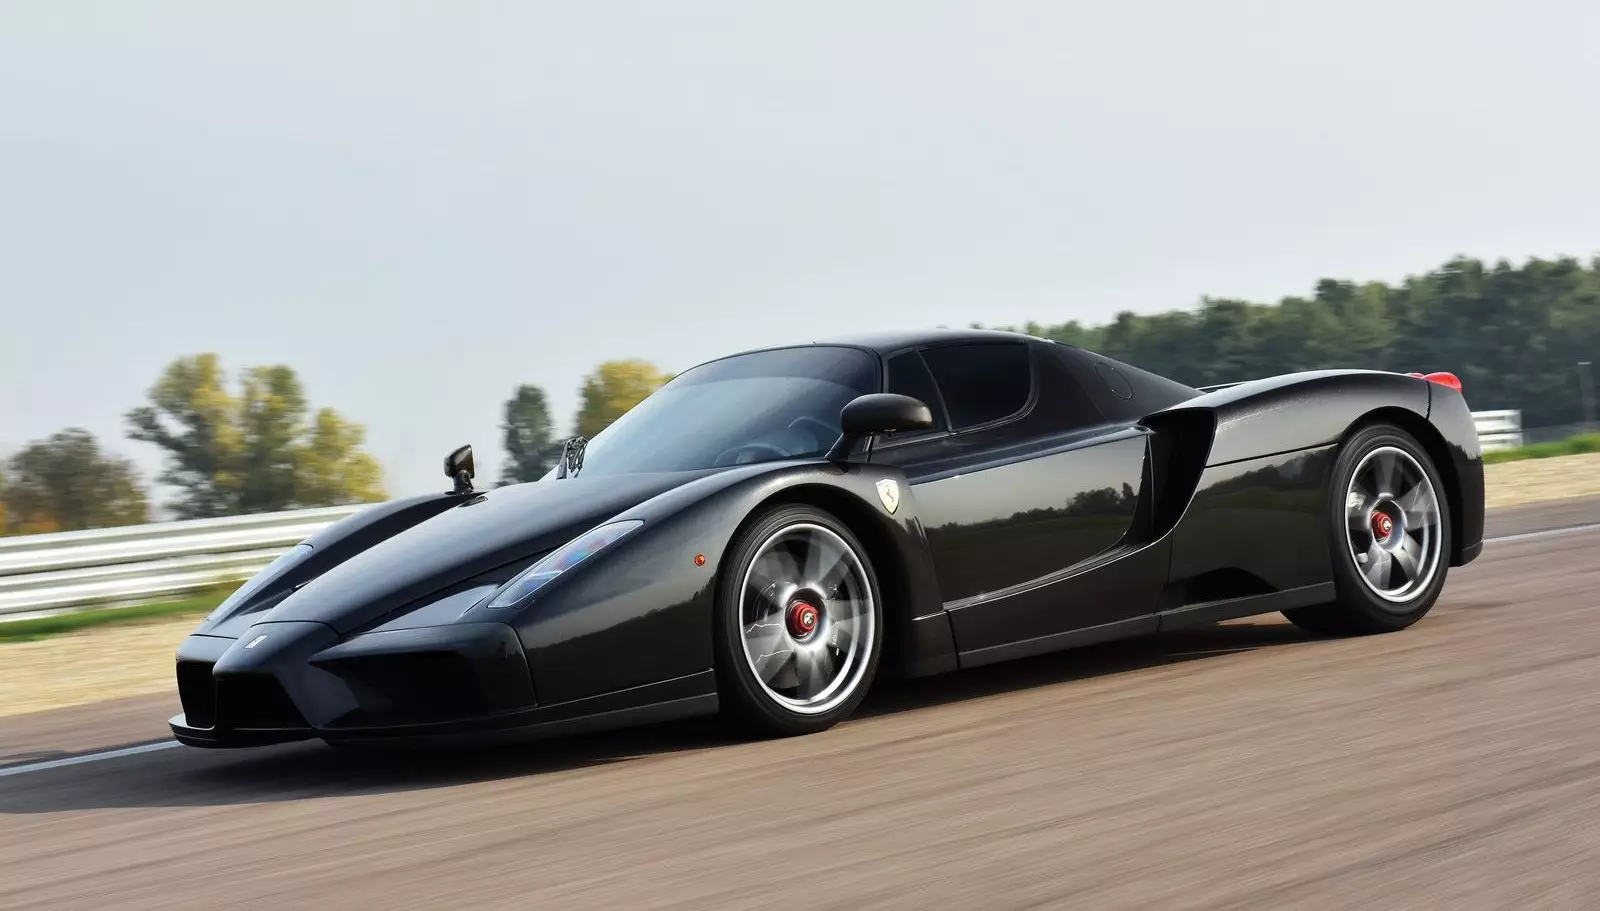 Ferrari Enzo rebuilt goes up for auction for nearly two million euros 22669_1